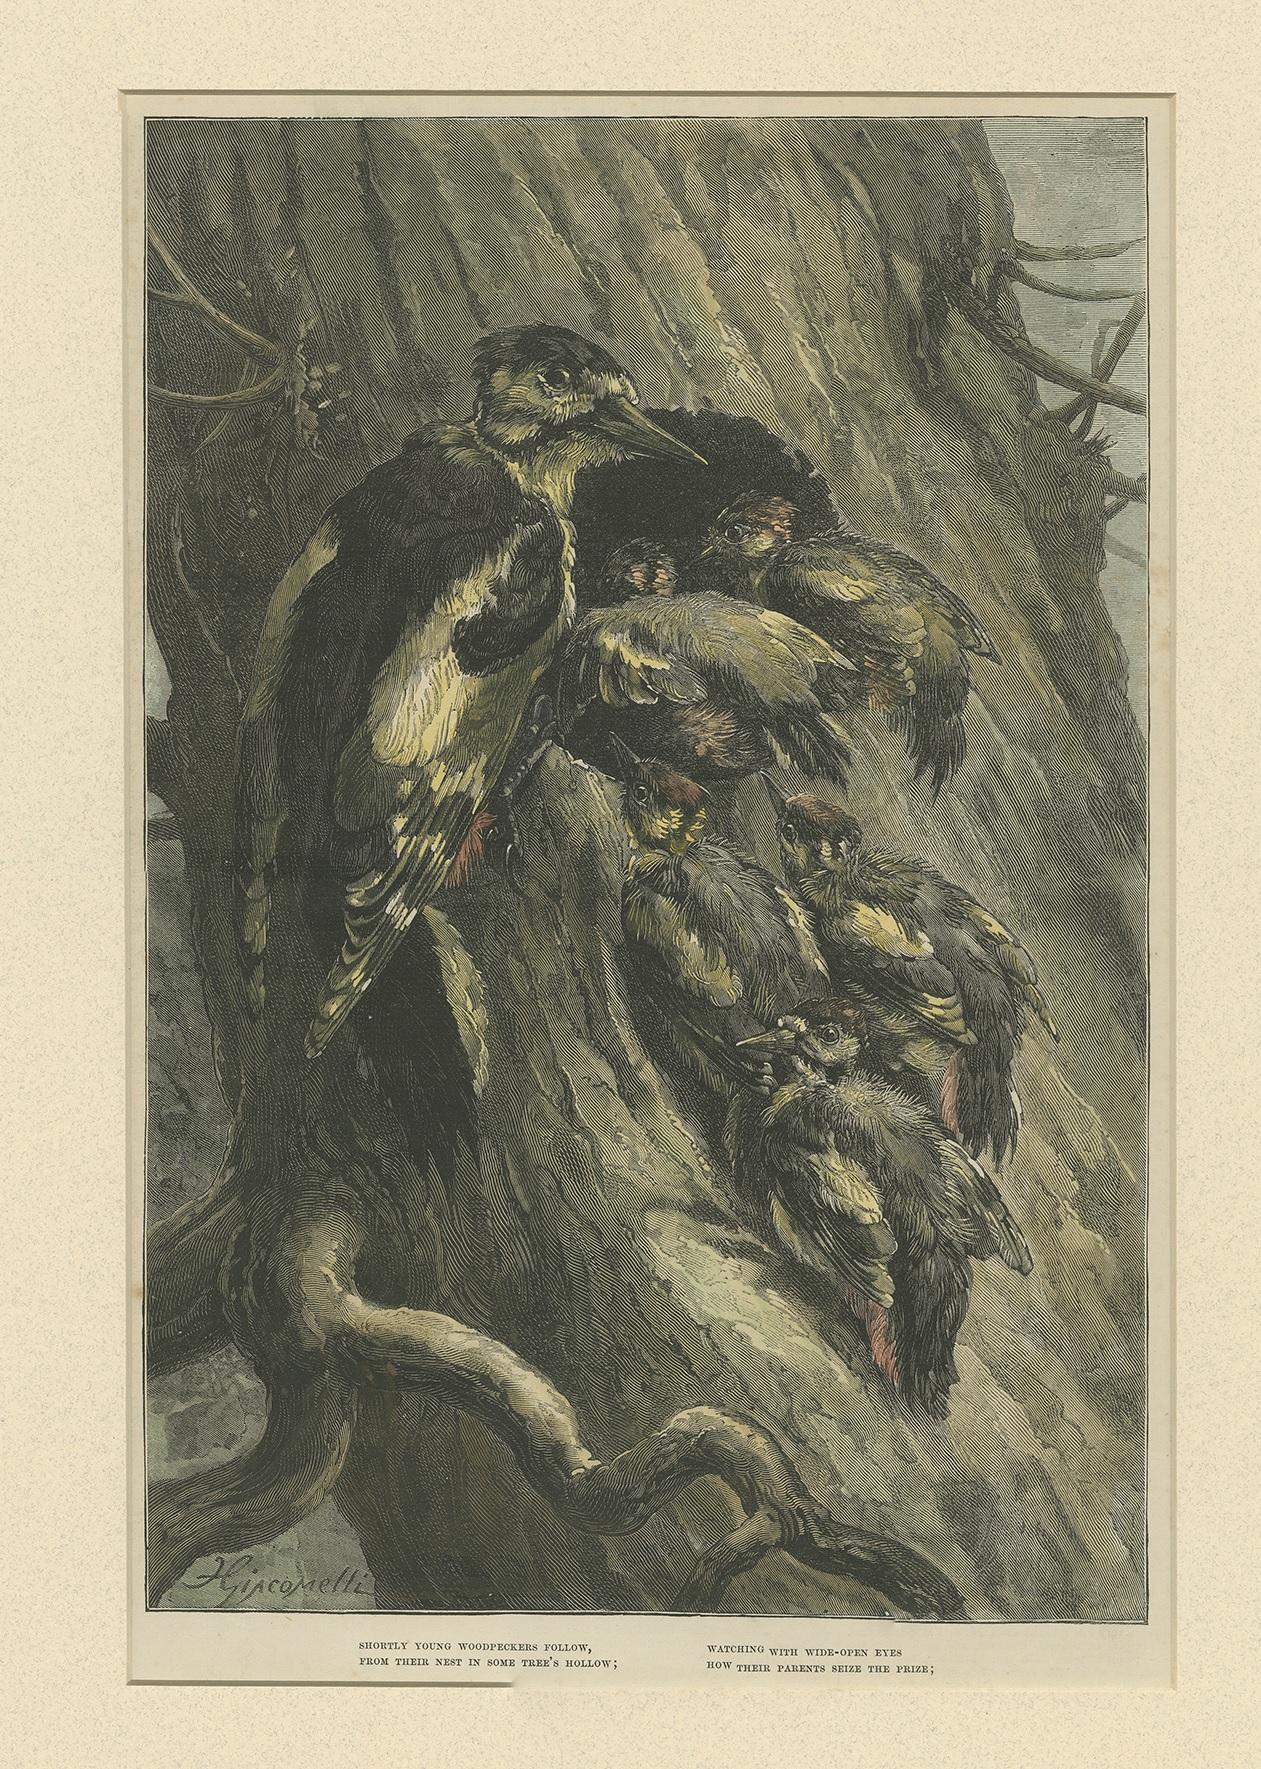 Antique print titled 'Shortly young woodpeckers follow; from their nest in some tree's hollow; Watching wide-open Eyes; how their parents seize the prize'. Print of woodpeckers. This print originates from 'The Illustrated London News', 1879.